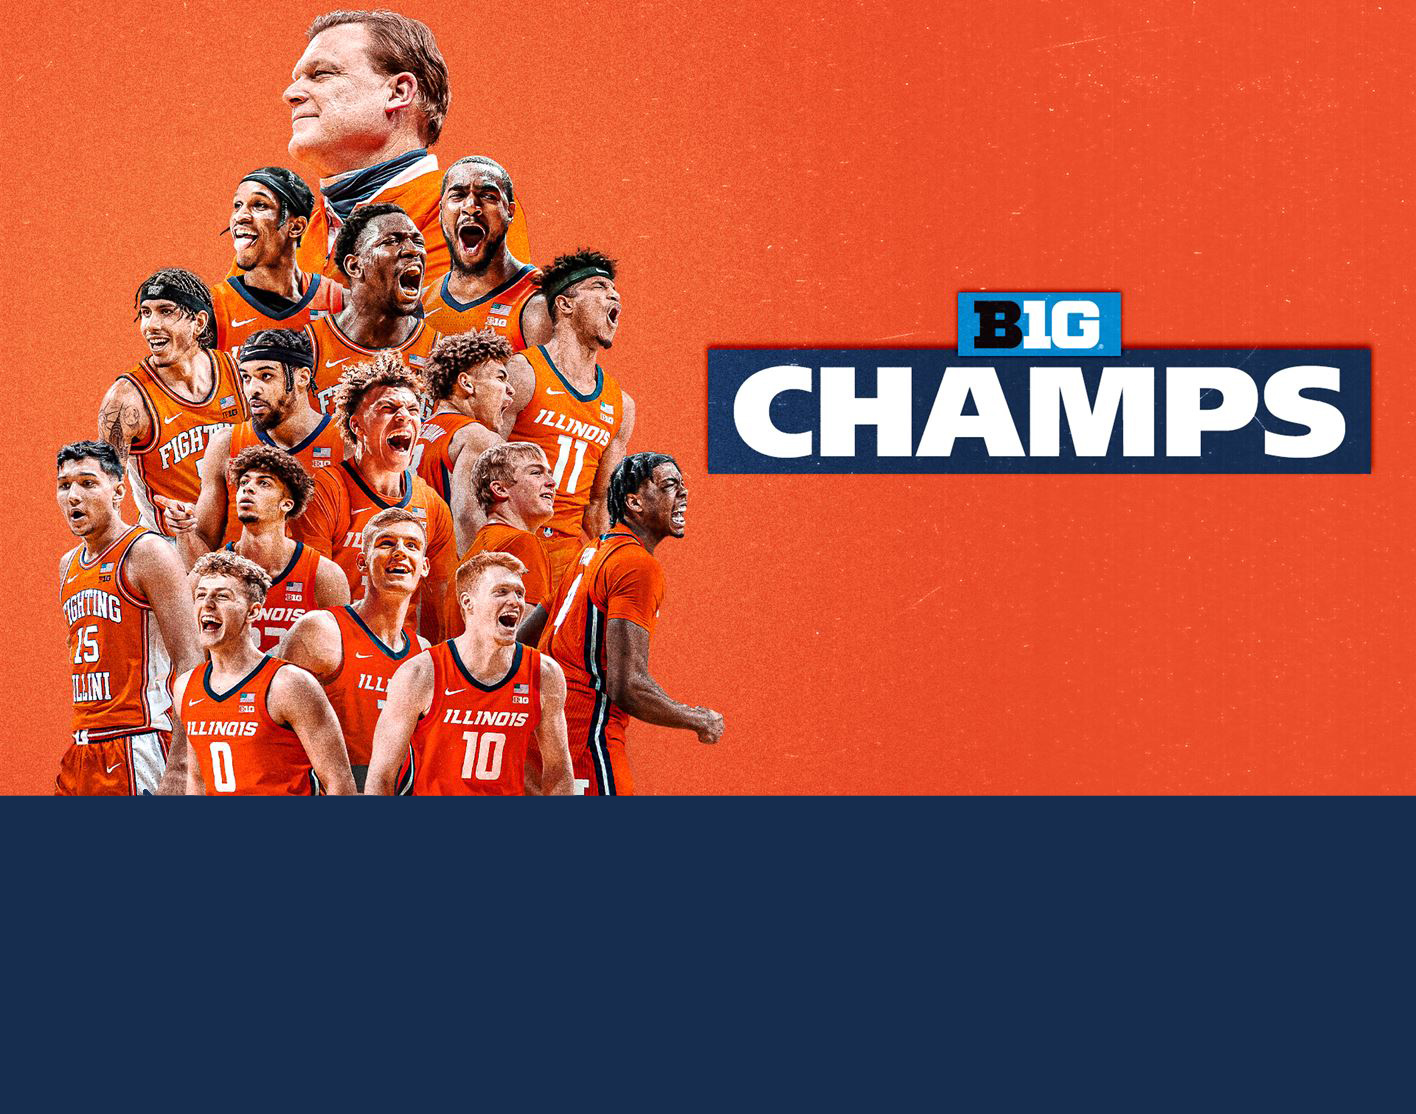 graphic features team members with text, B1G Champs